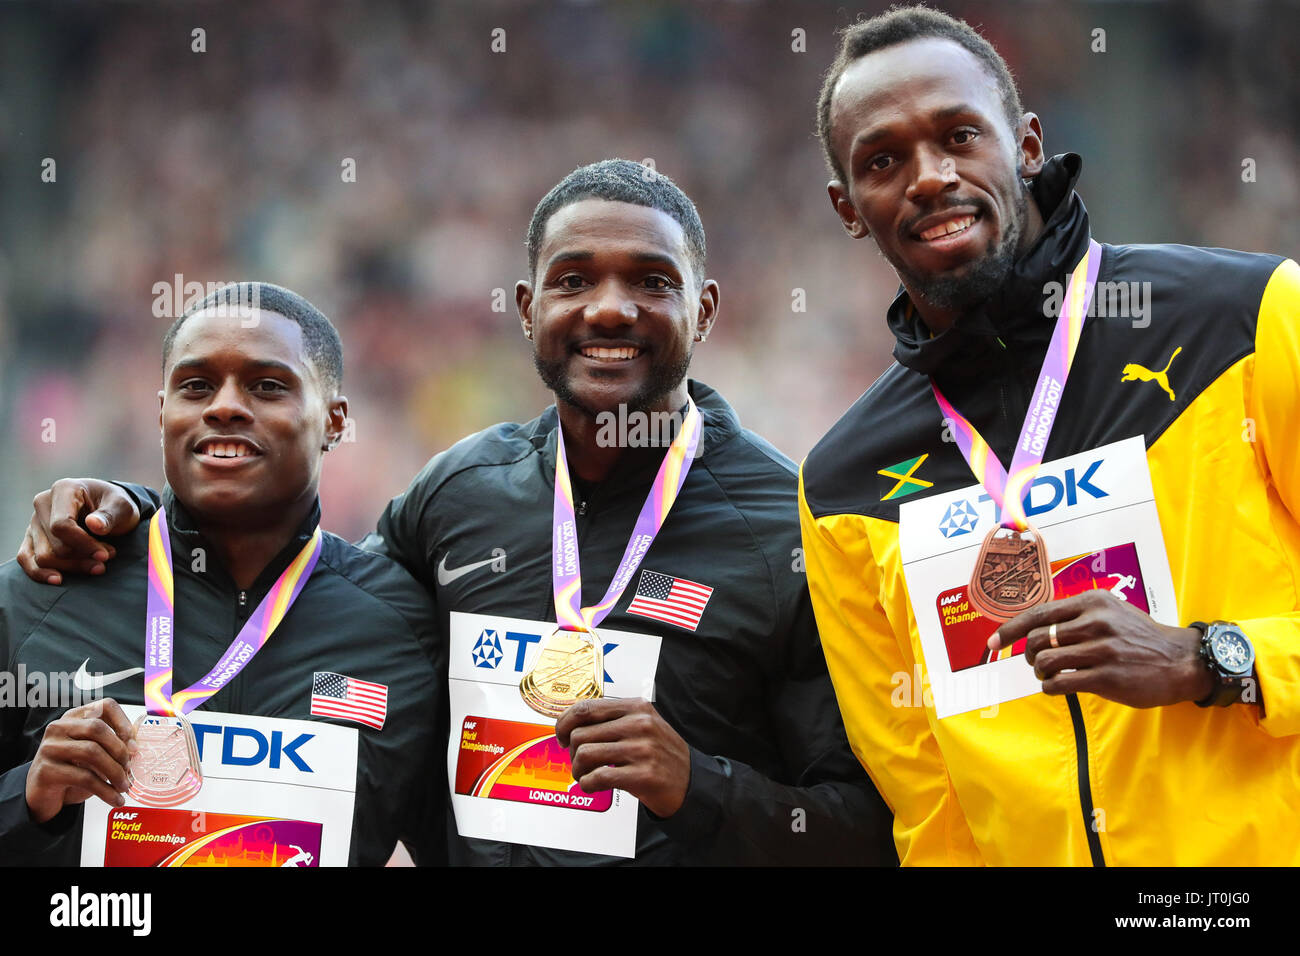 London, 2017 August 06. Men's 100m medalists Christian Coleman (silver), Justin Gatlin (gold) and Usain Bolt (bronze) pose with their medals on the podium on day three of the IAAF London 2017 world Championships at the London Stadium. © Paul Davey. Stock Photo